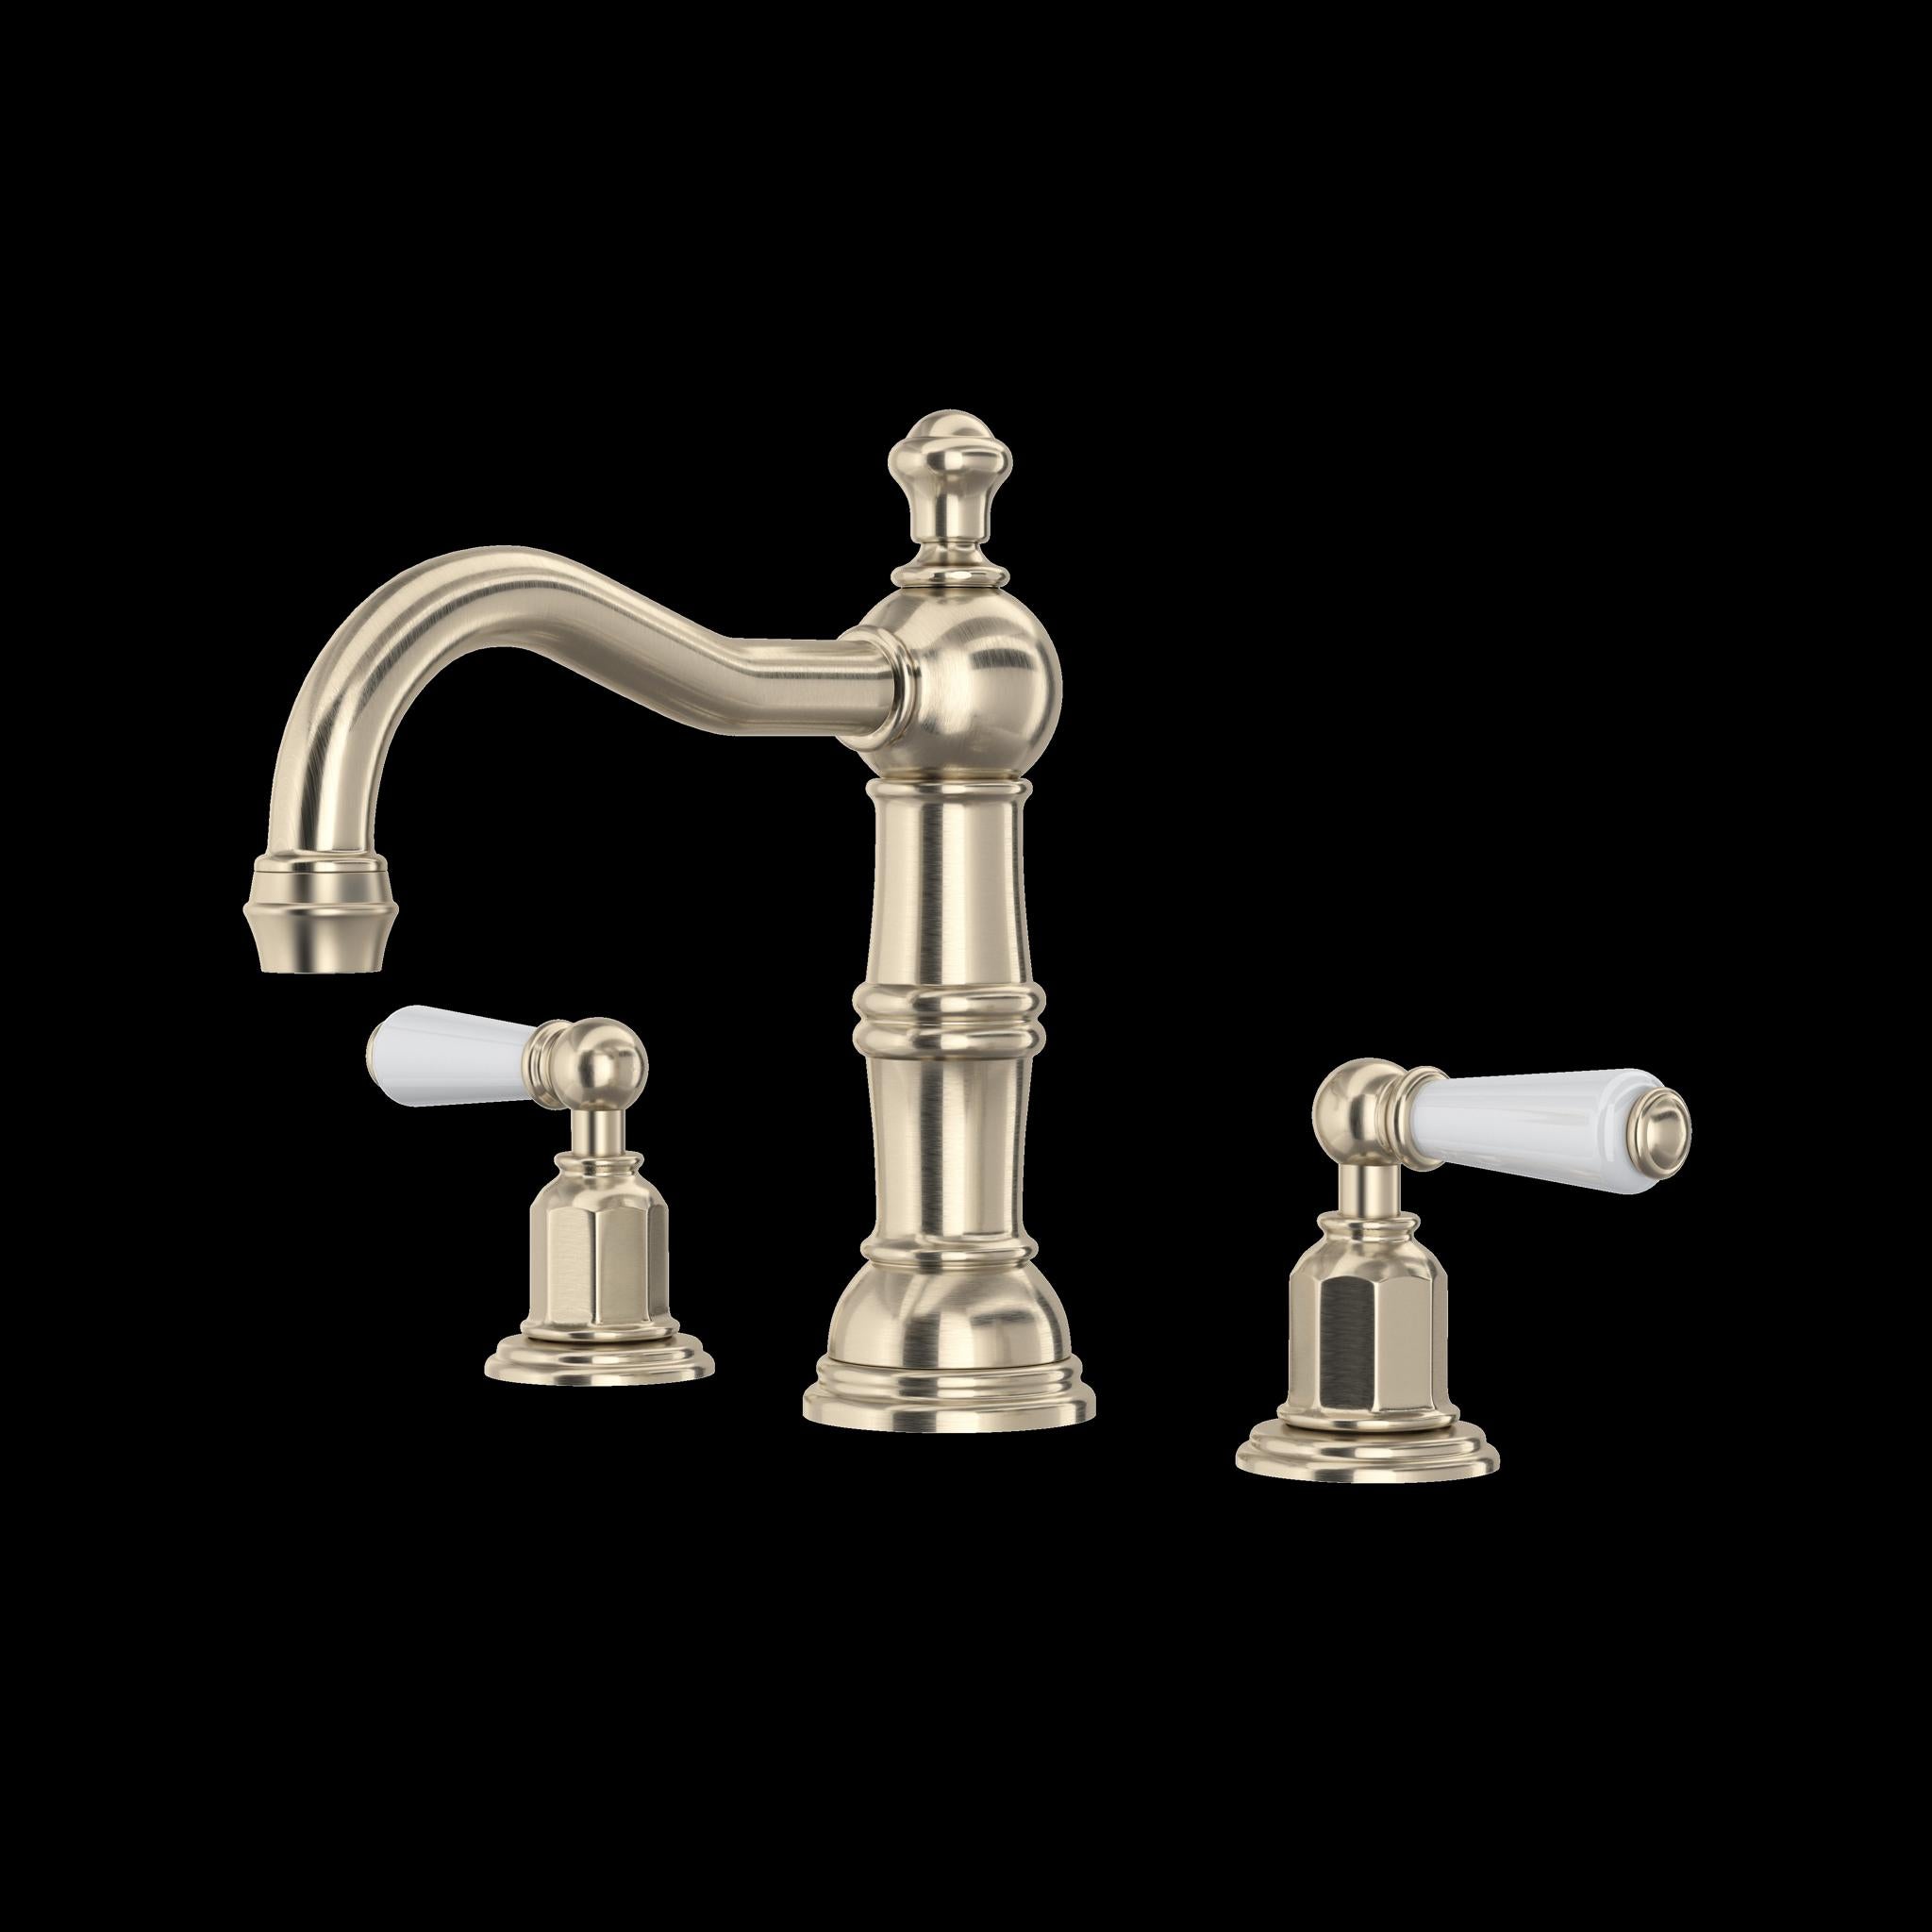 Perrin & Rowe U.3720 Edwardian Widespread Lavatory Faucet With Column Spout